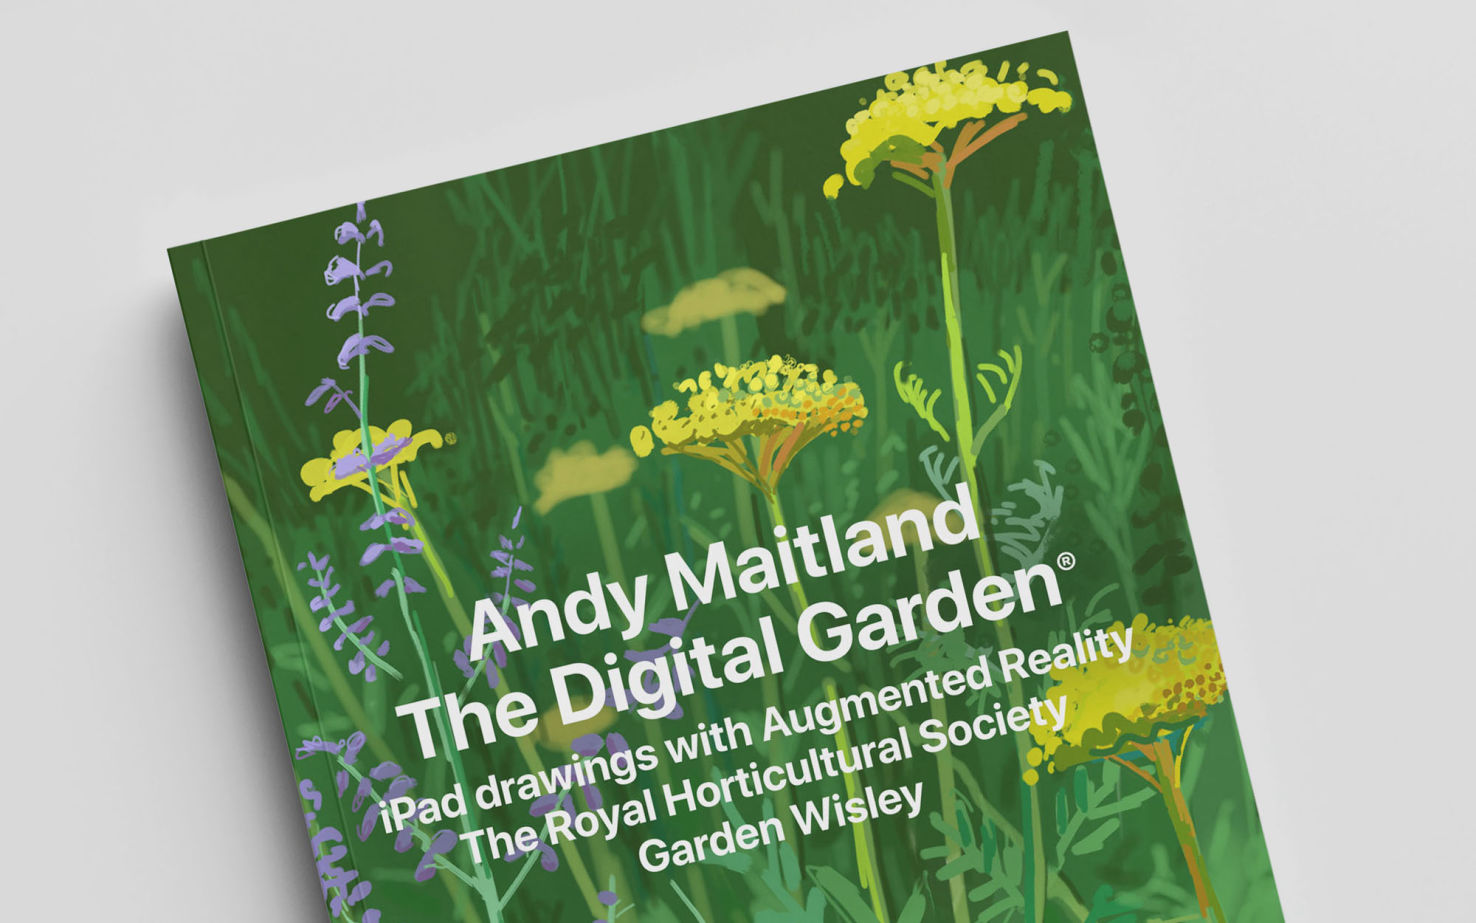 Works - 'The Digital Garden 2018, iPad drawings with augmented reality exhibition book'